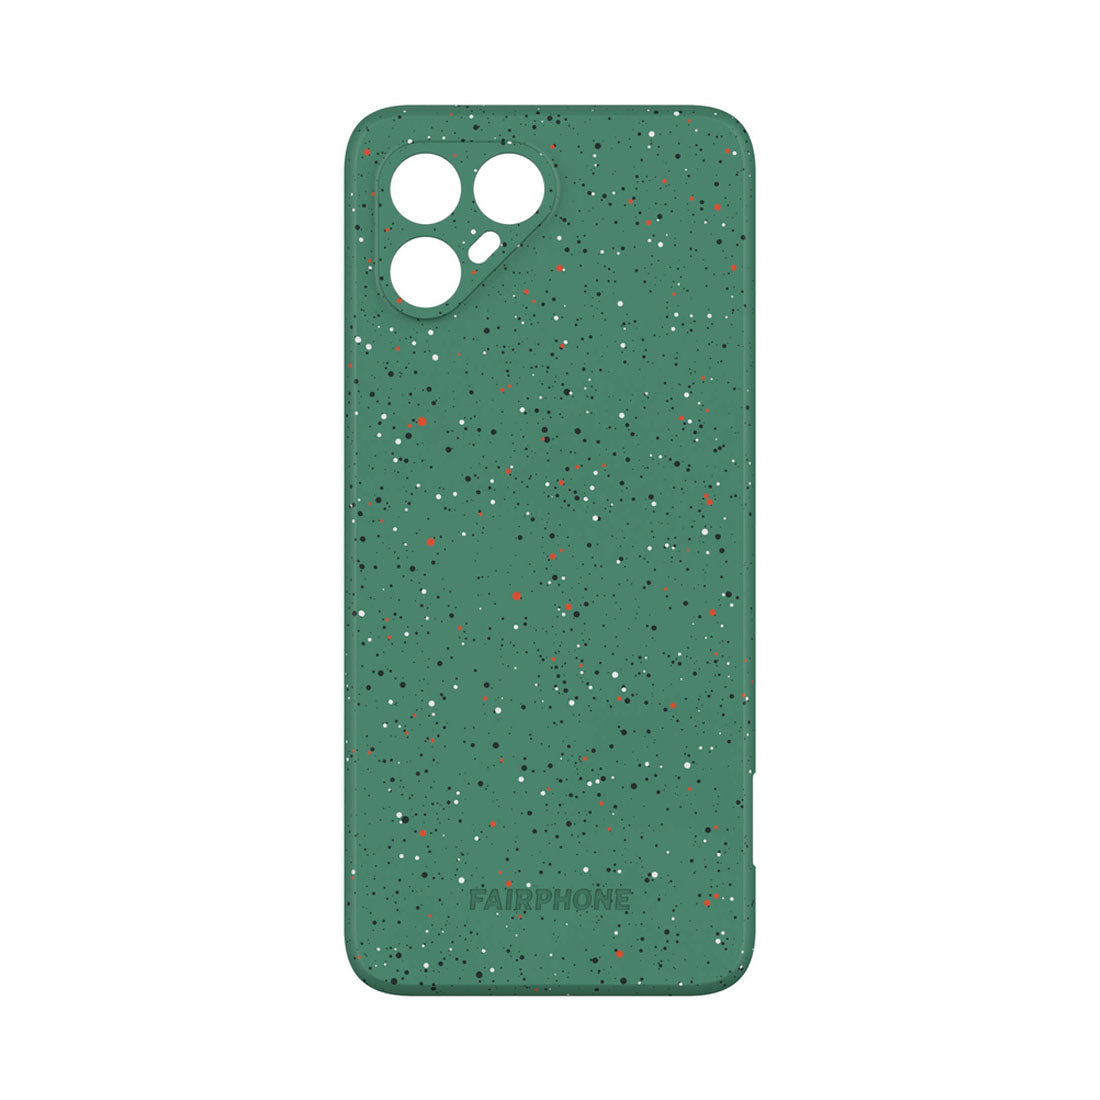 Fairphone F4COVR-1GS-WW1 - Back housing cover for Fairphone 4 in Speckled Green